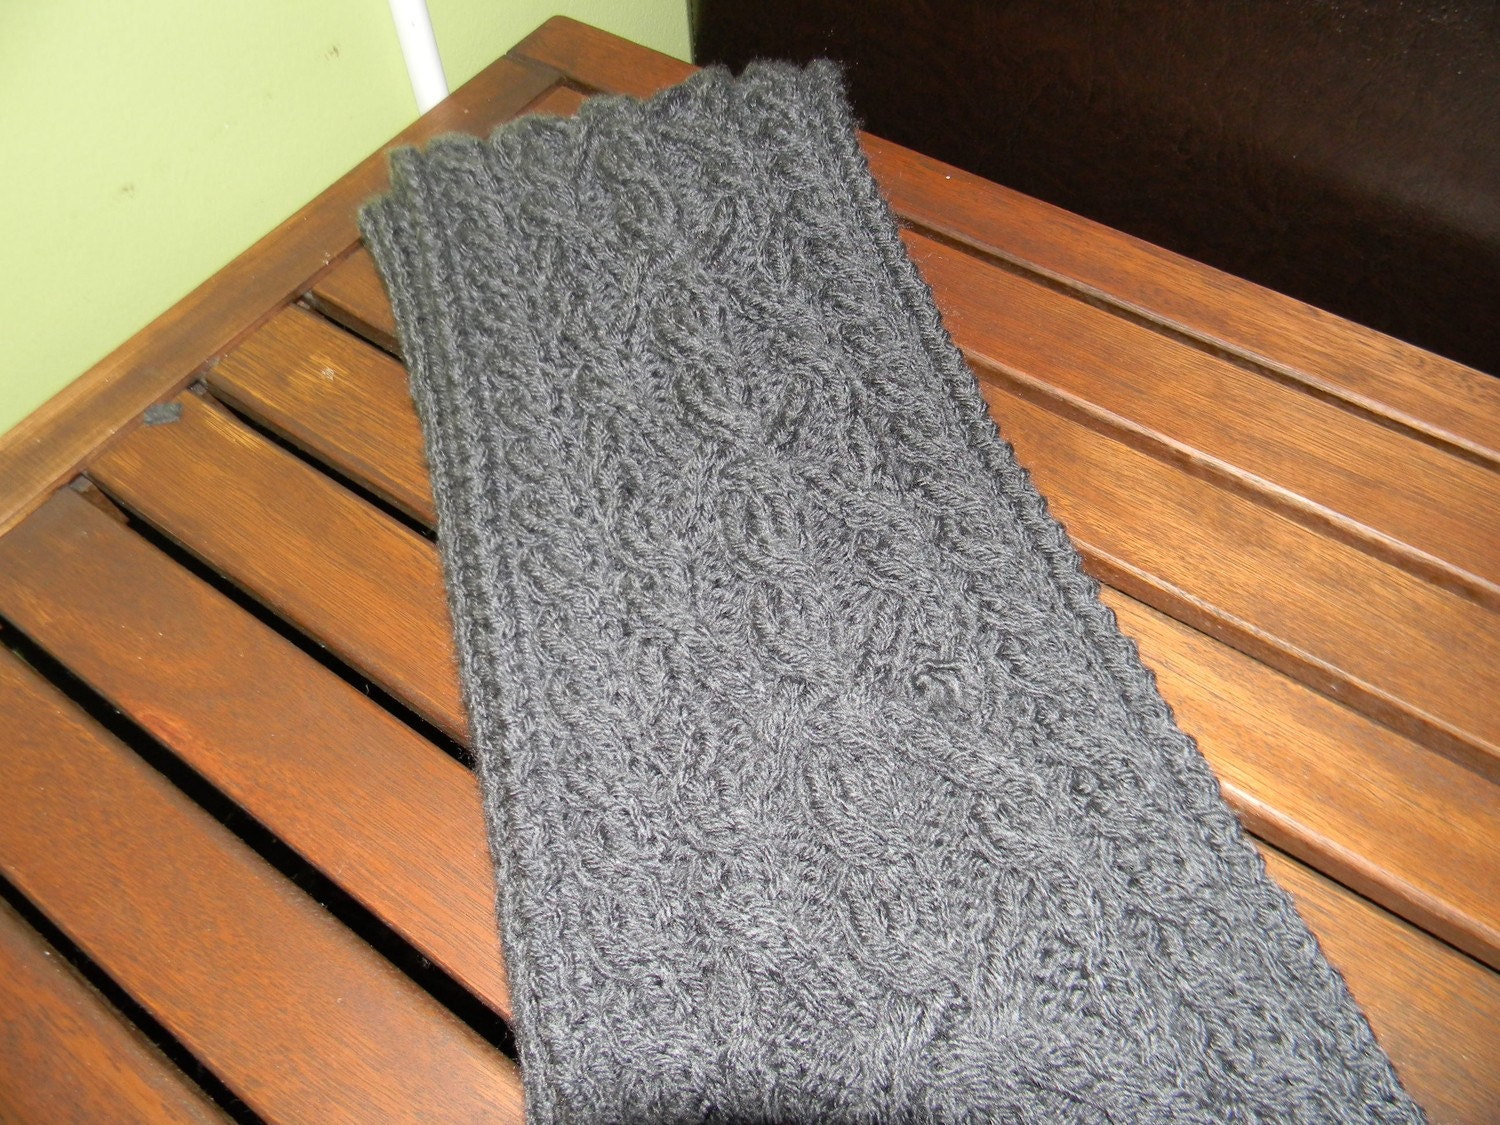 Men's scarf charcoal grey unique cable knit by Seuphoria on Etsy